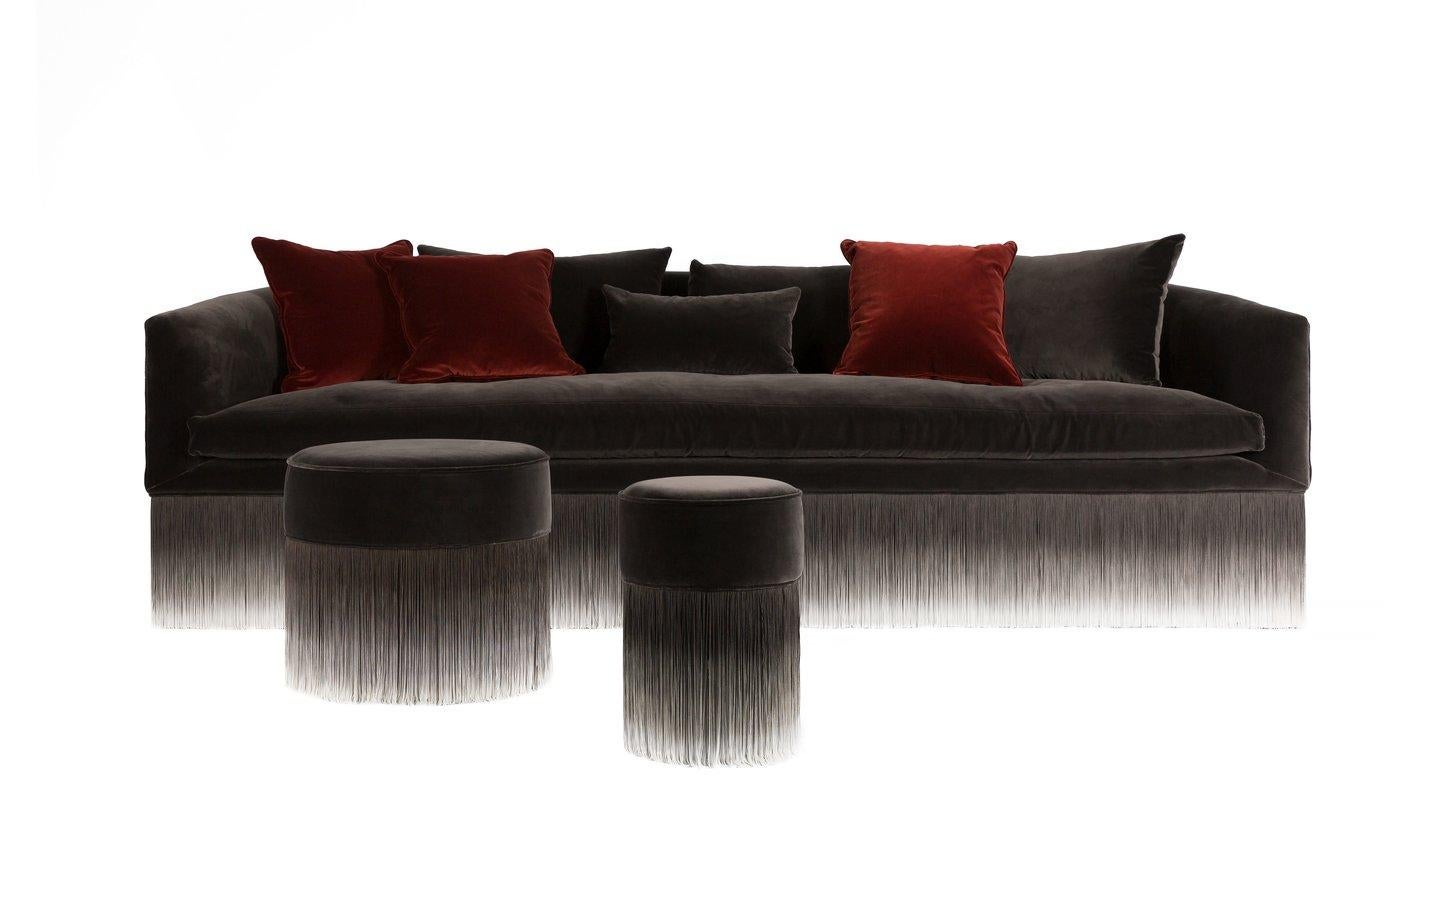 Modern Moooi Amami Sofa with Fringes in Light Grey Upholstery by Lorenza Bozzoli For Sale